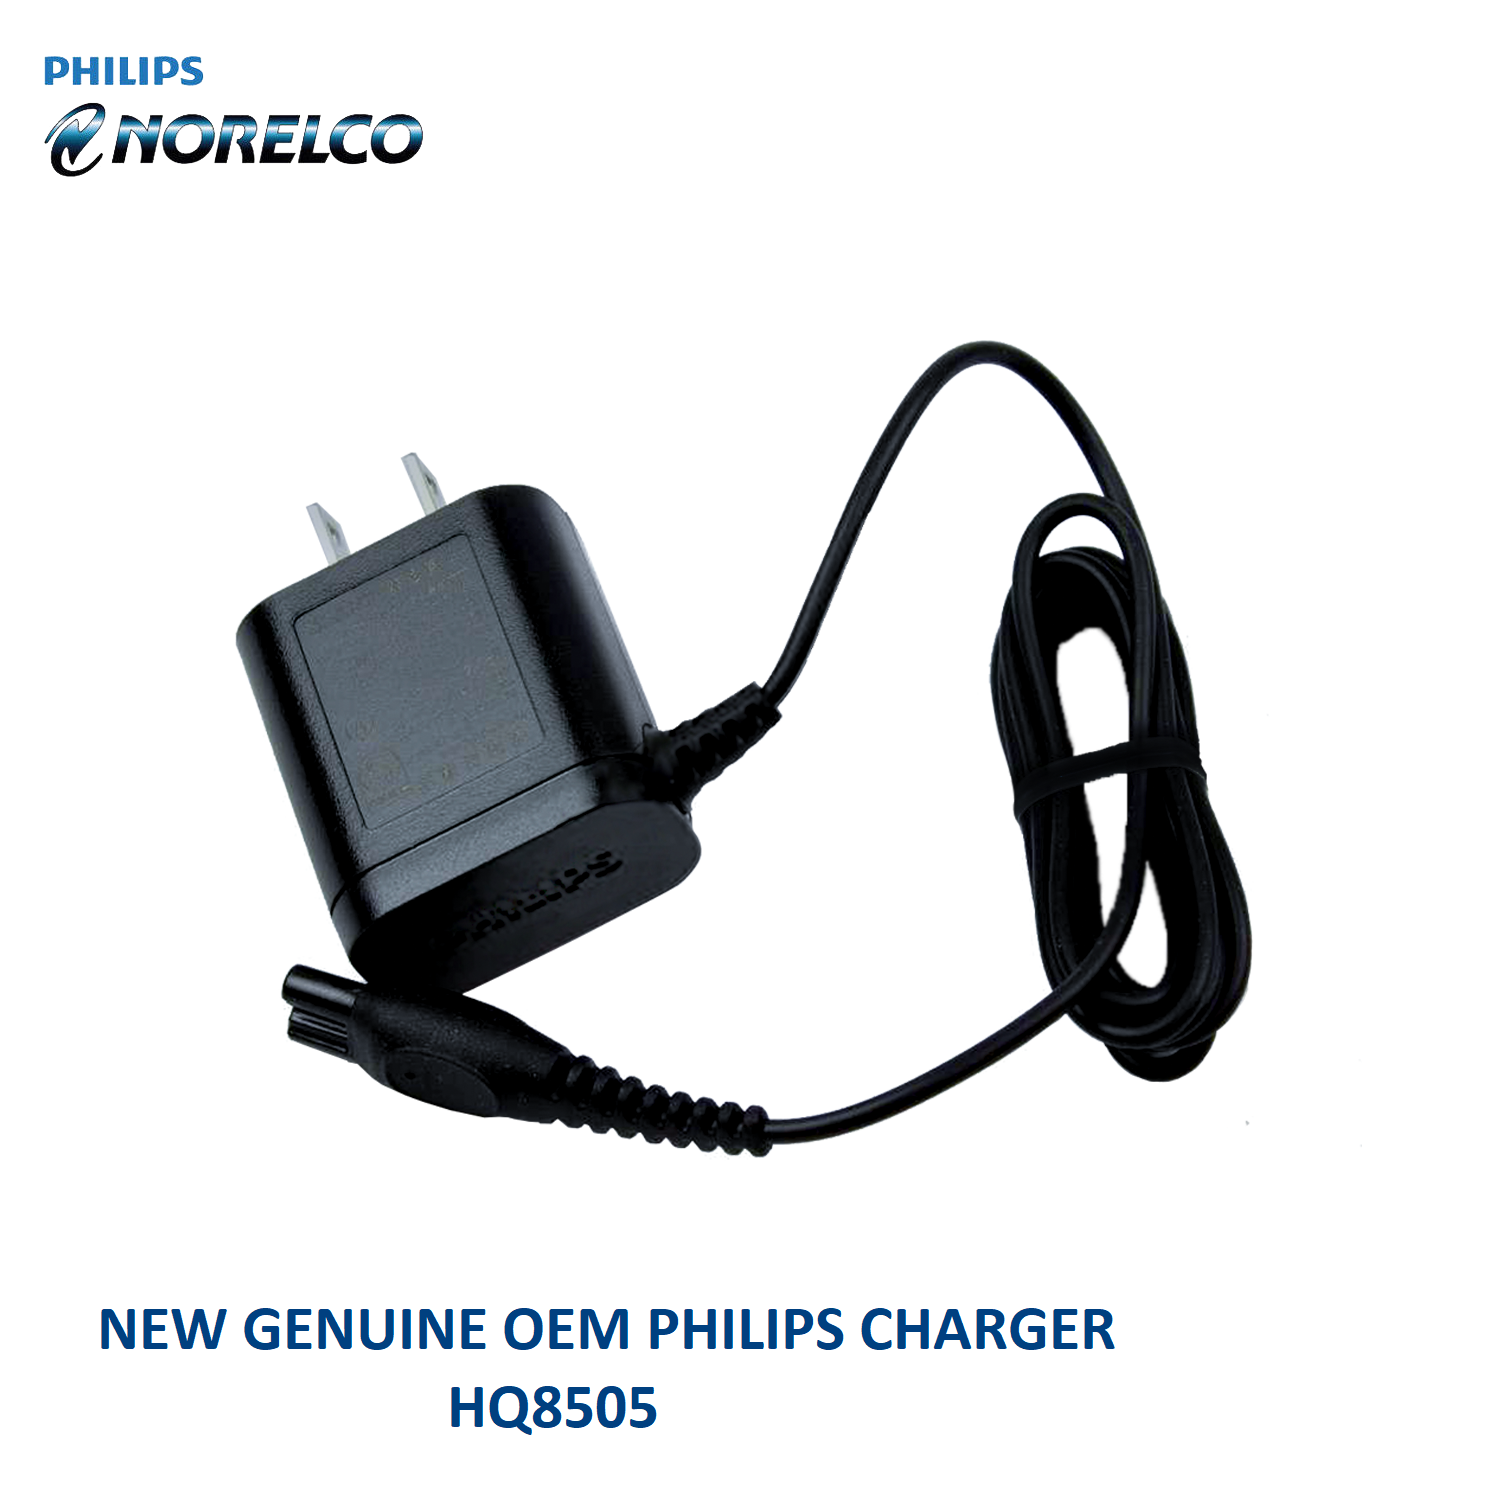 New Genuine Philips Hq8505 15v Power Charger Cord For Norelco Shavers